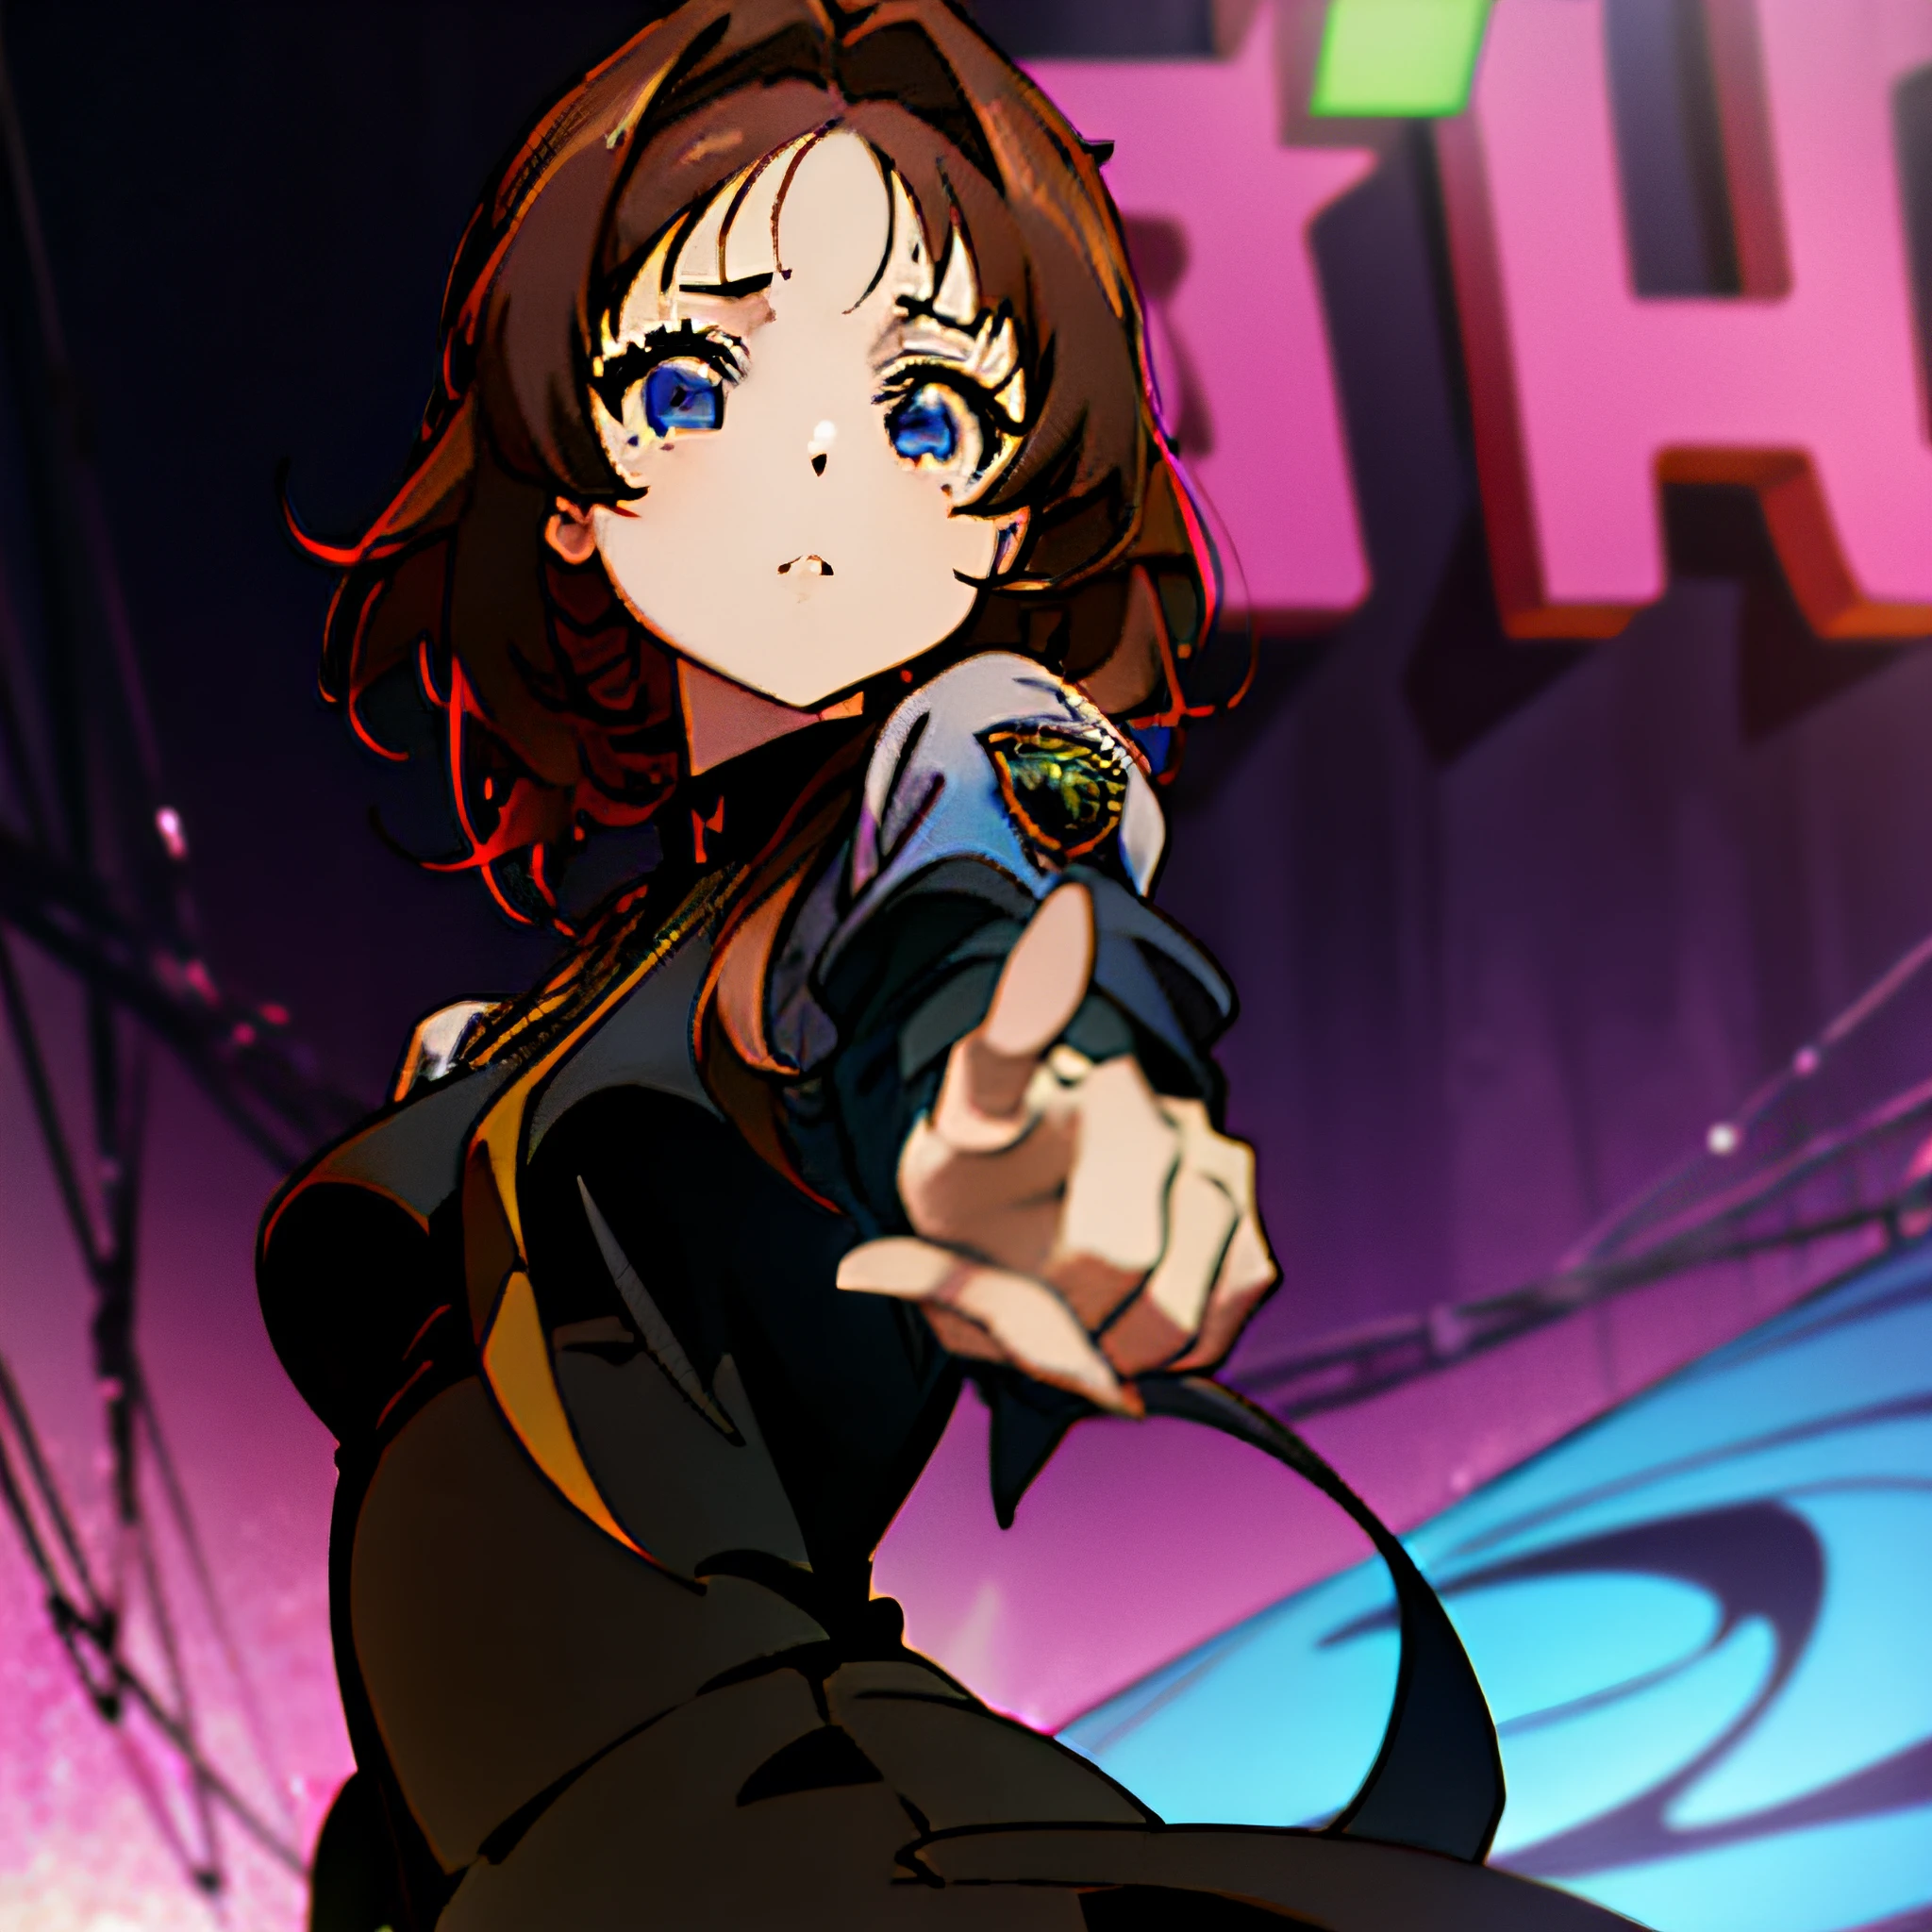 Imagen ultra detailed, Anime-style woman, manga, ultra detailed, Shingo Araki style, with dark brown hair, with futuristic suit, On neon streets